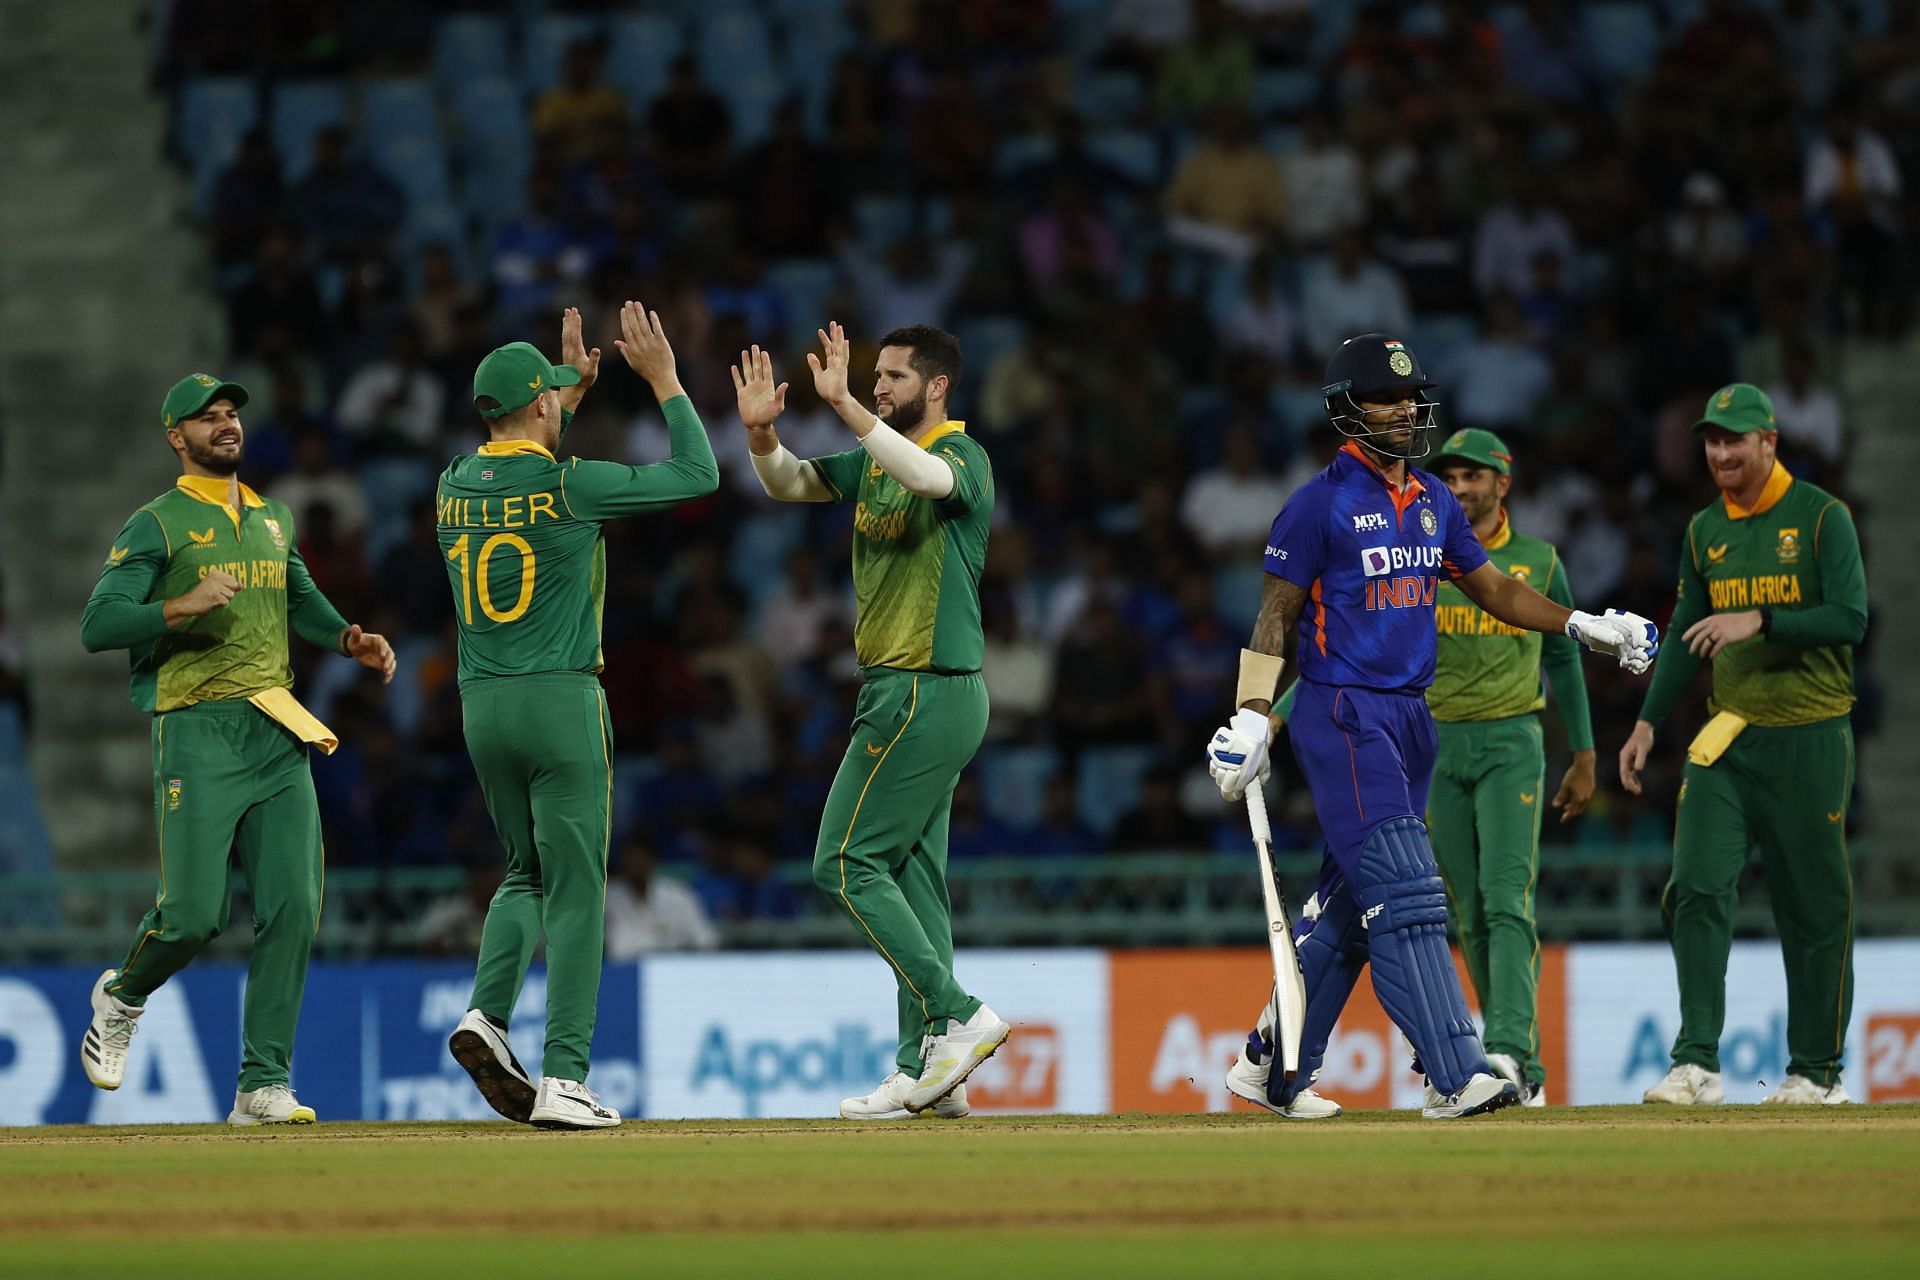 India vs South Africa, 3rd ODI: Probable XIs, pitch report, weather forecast, match prediction and live streaming details